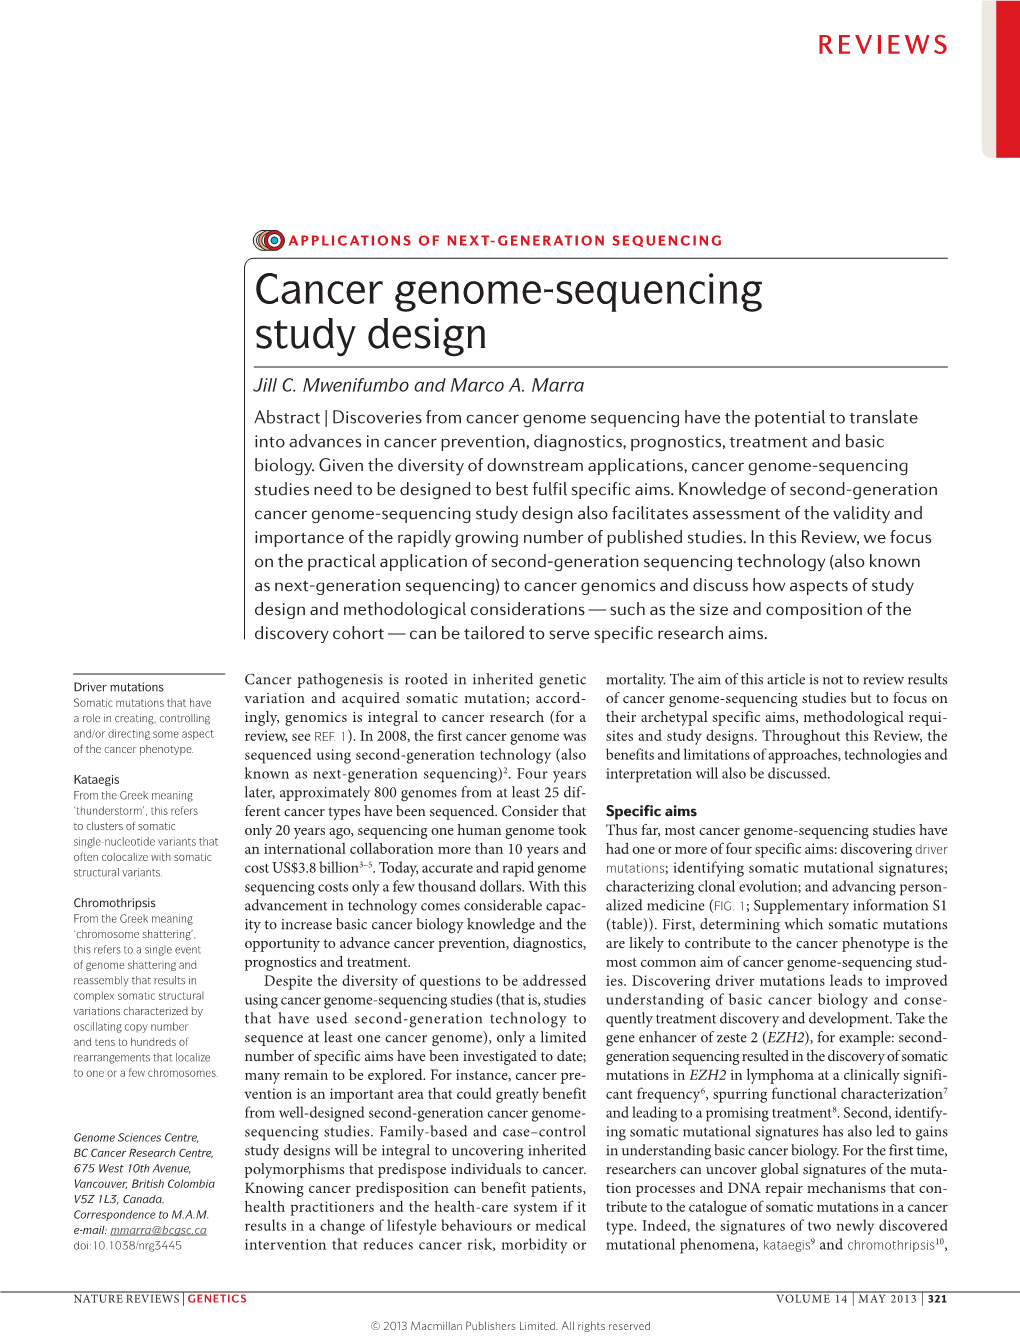 Cancer Genome-Sequencing Study Design